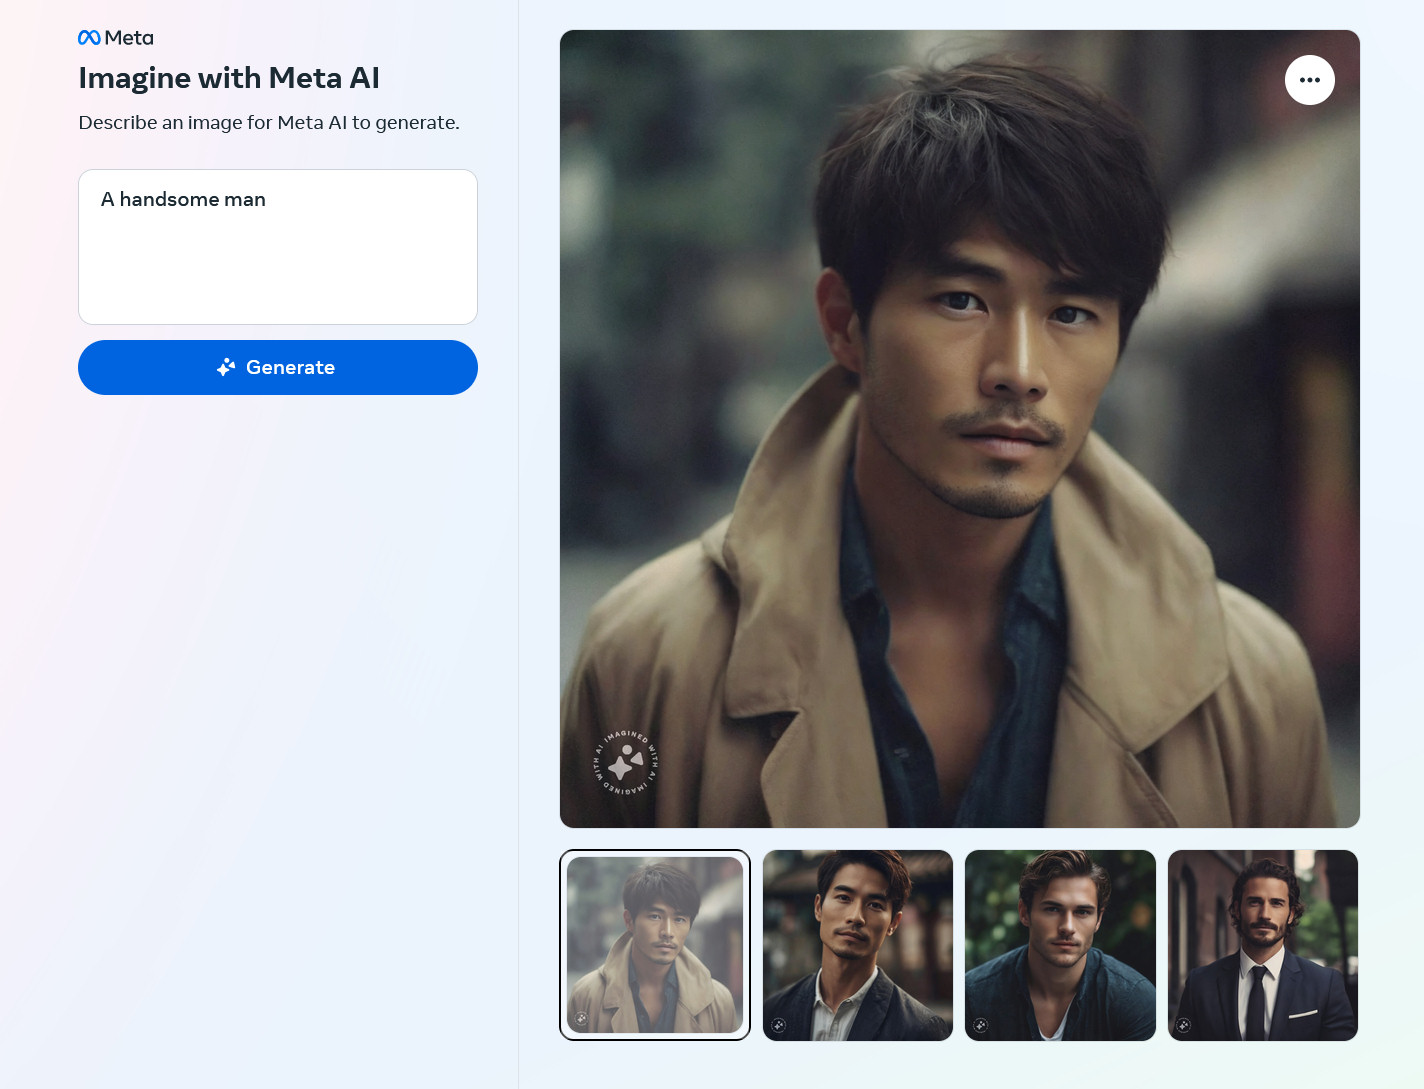 AI-generated images of a handsome man created by Meta Emu on the Imagine with Meta AI website.